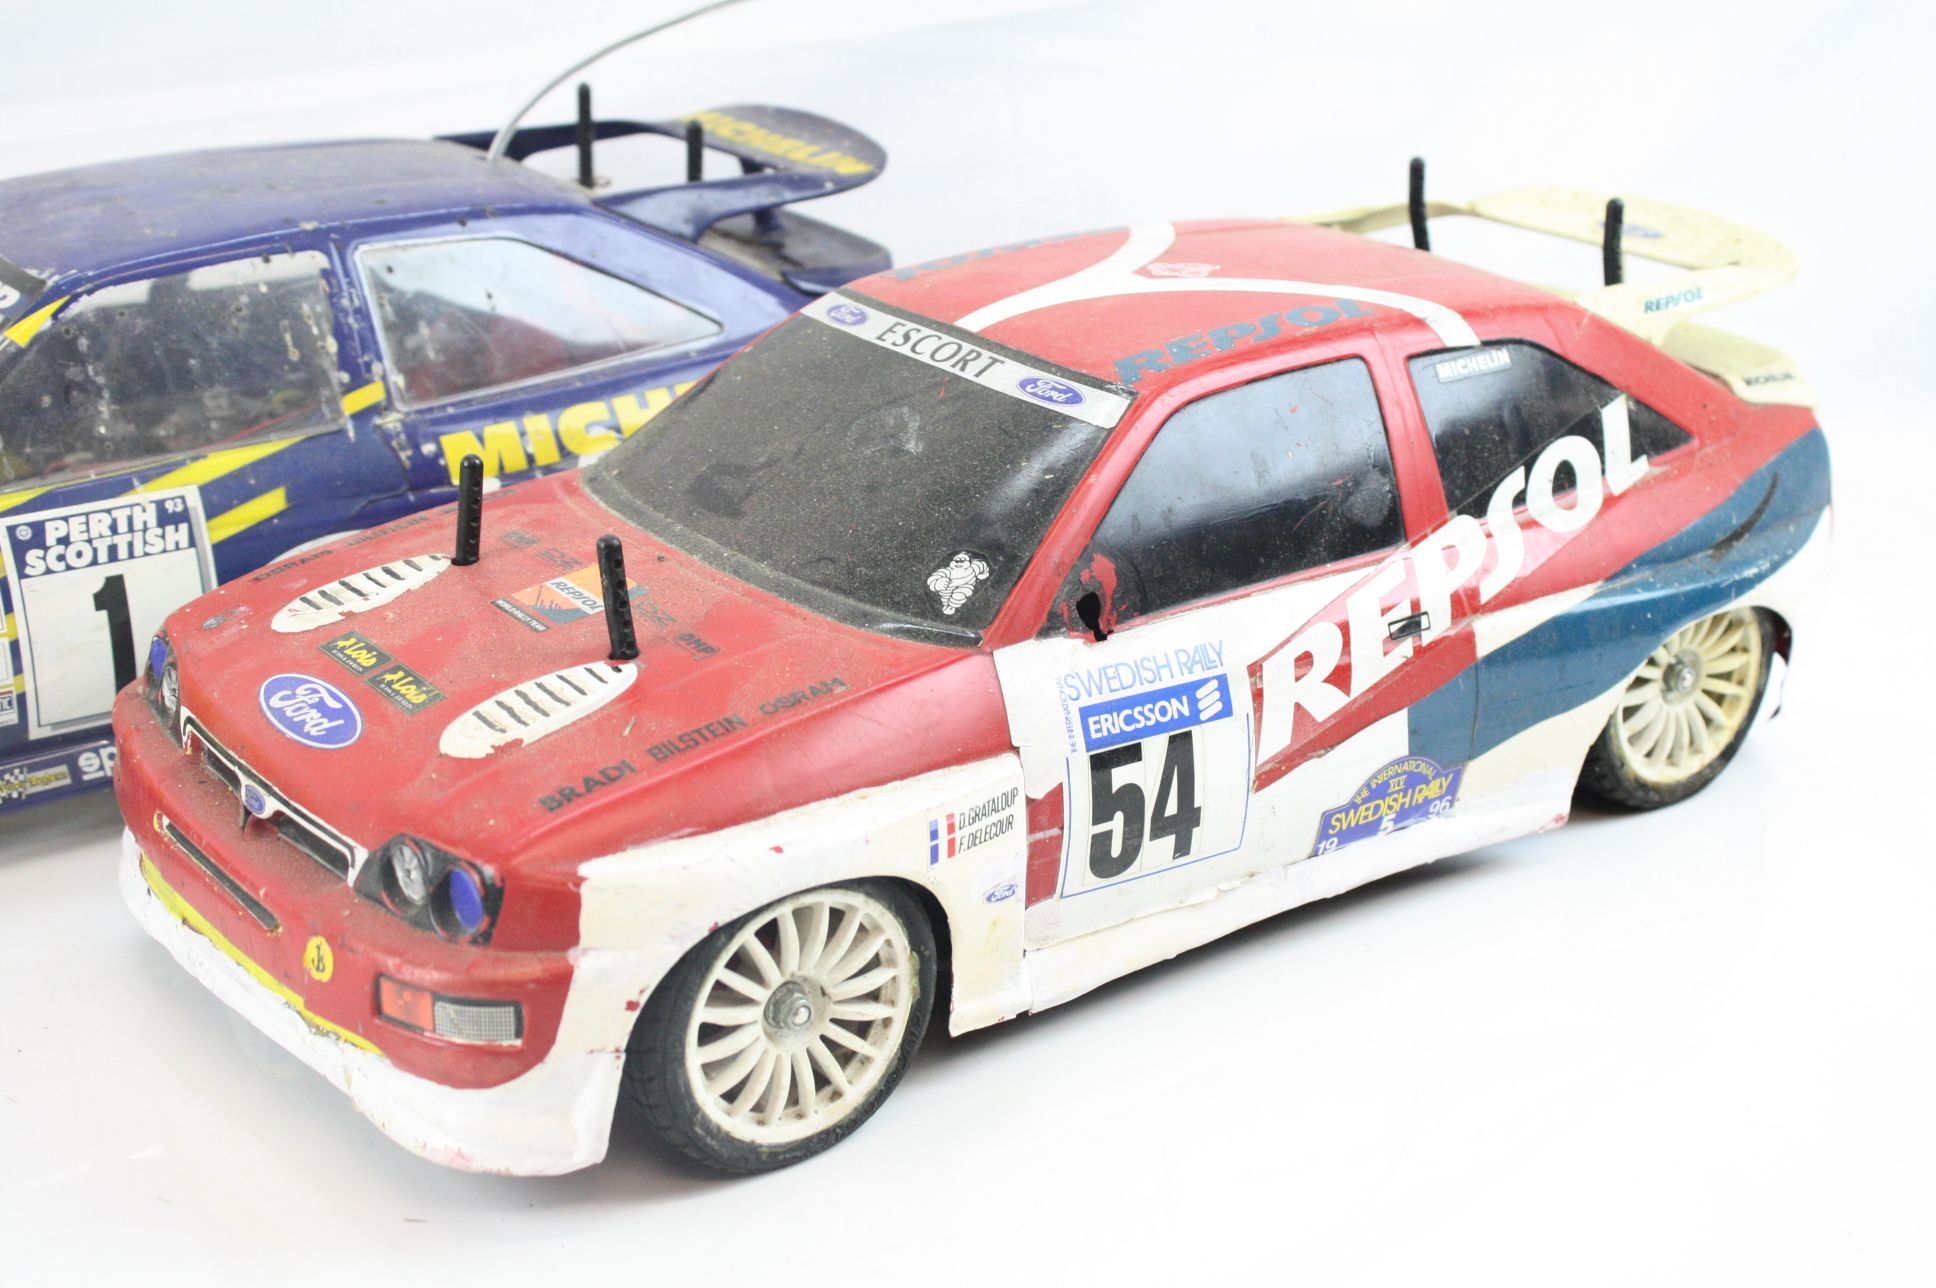 A Tamiya 58125 Ford Escort RS Michelin Pilot with TA01 chassis together with a Tamiya Ford Escort RS - Image 2 of 5